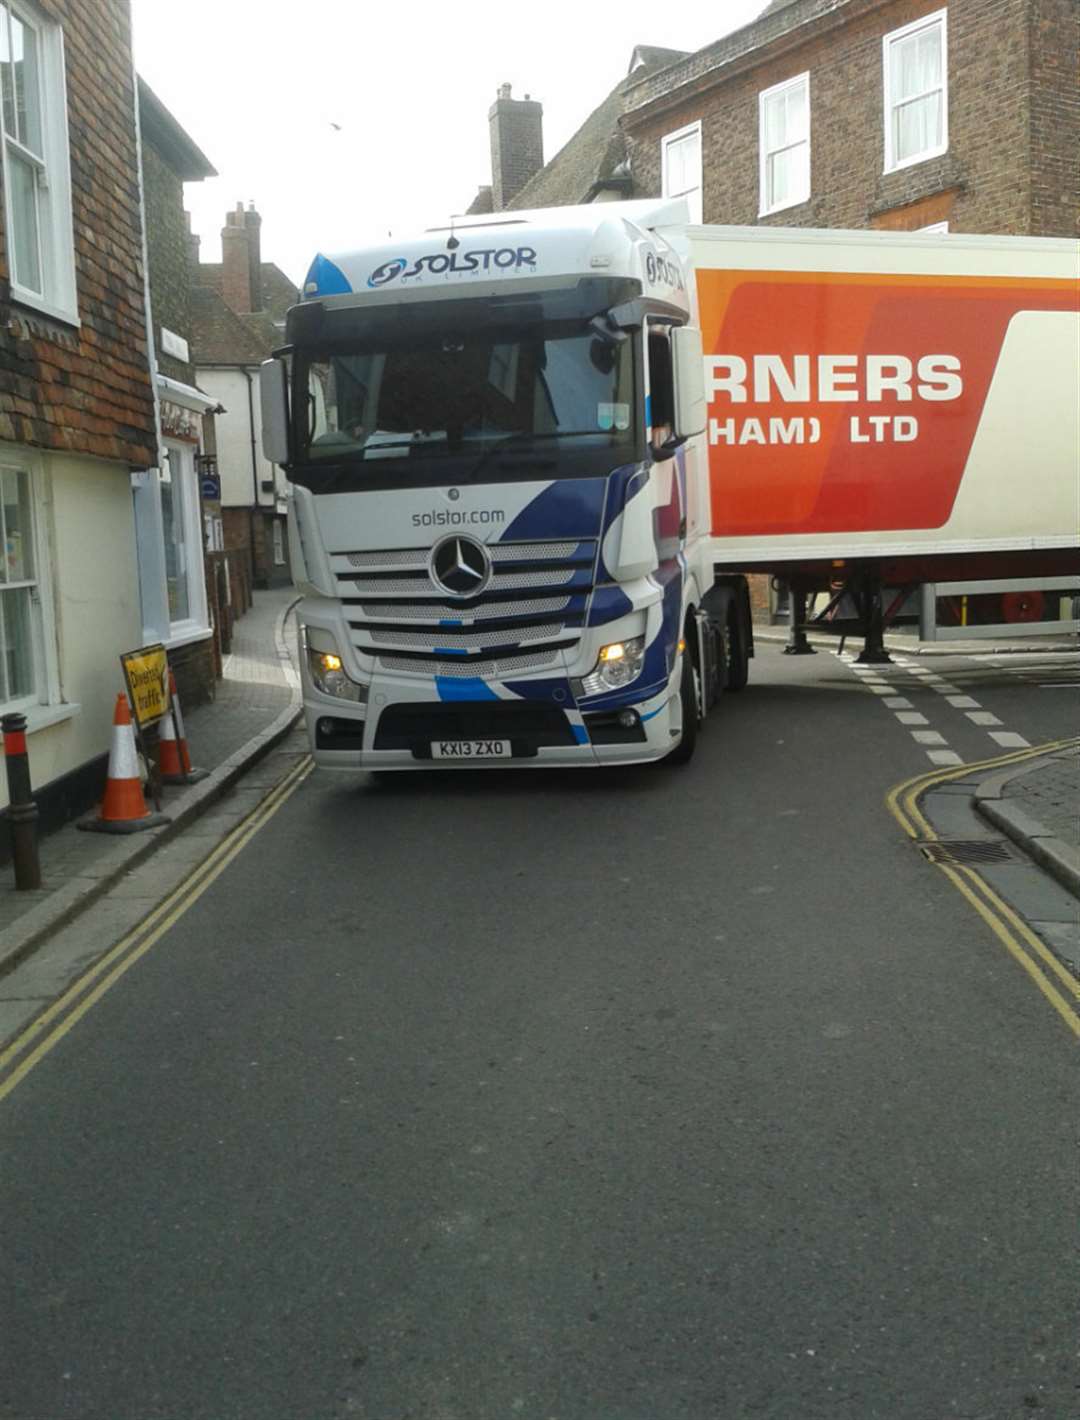 Lorry coming through the town